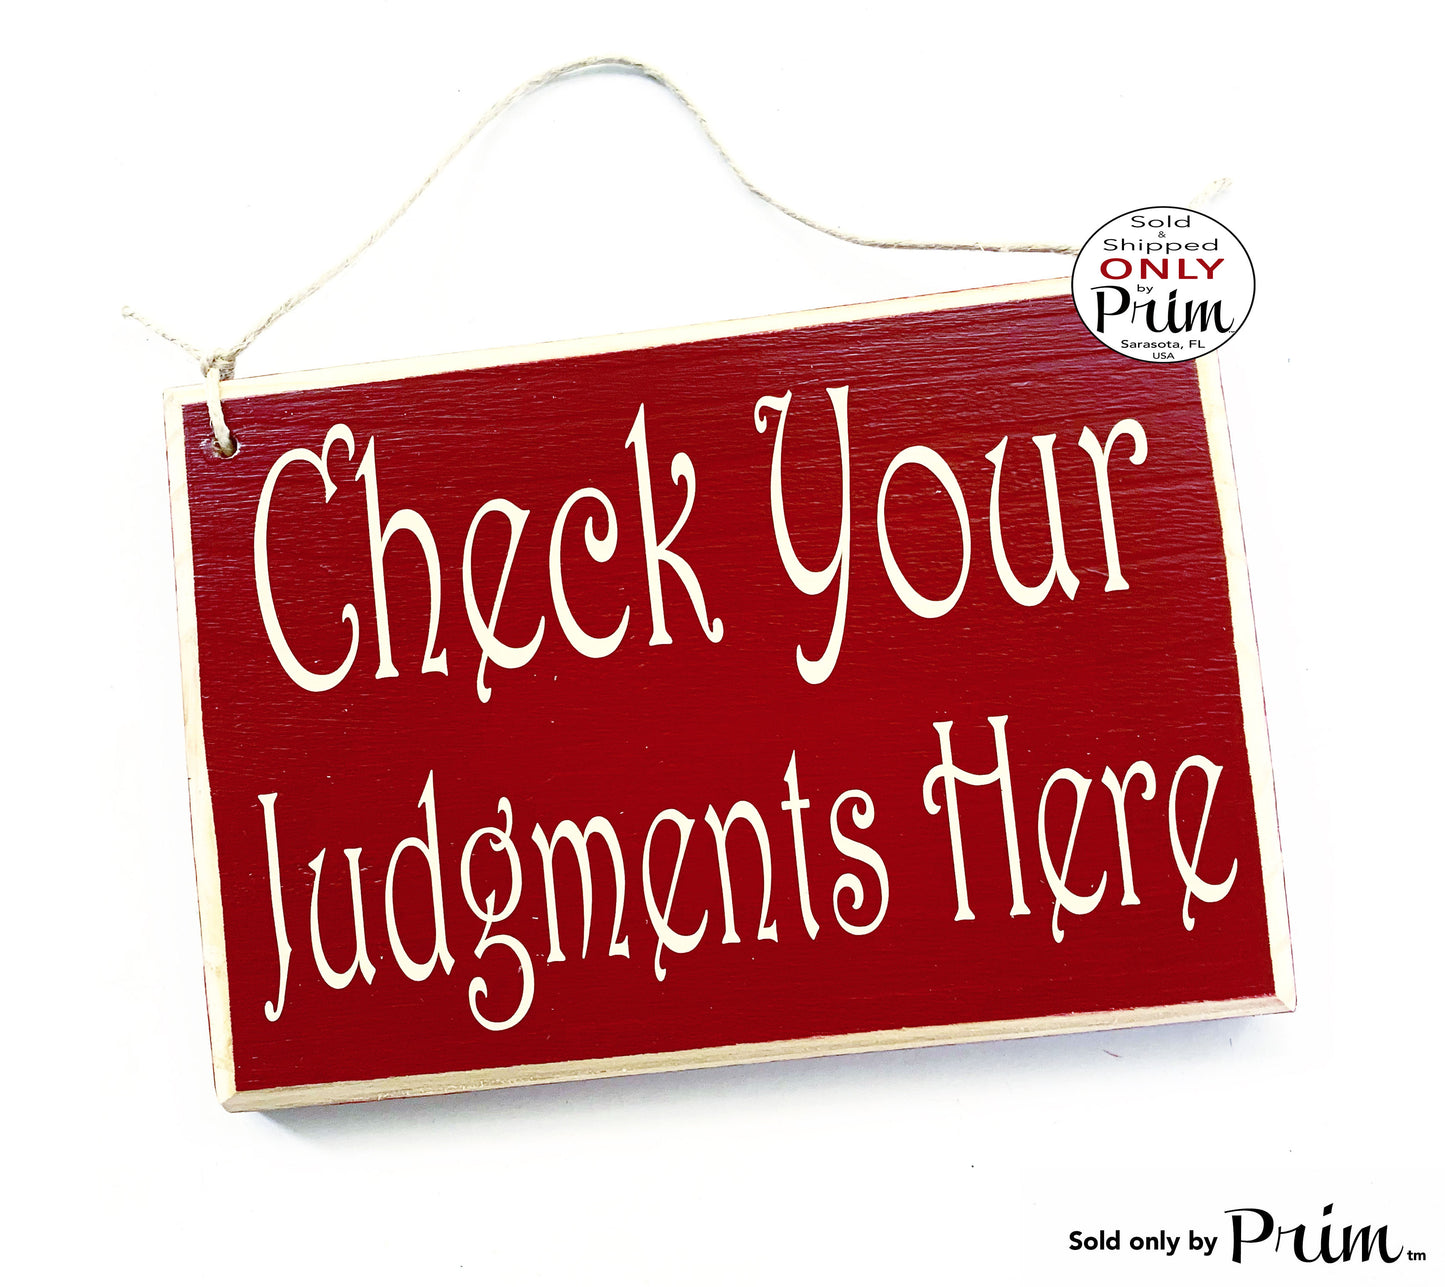 8x6 Check Your Judgment Here Custom Wood Sign Namaste Drama Be Nice or Leave Zen Meditation Calm Shhh Quiet Please No Gossip Designs By Prim